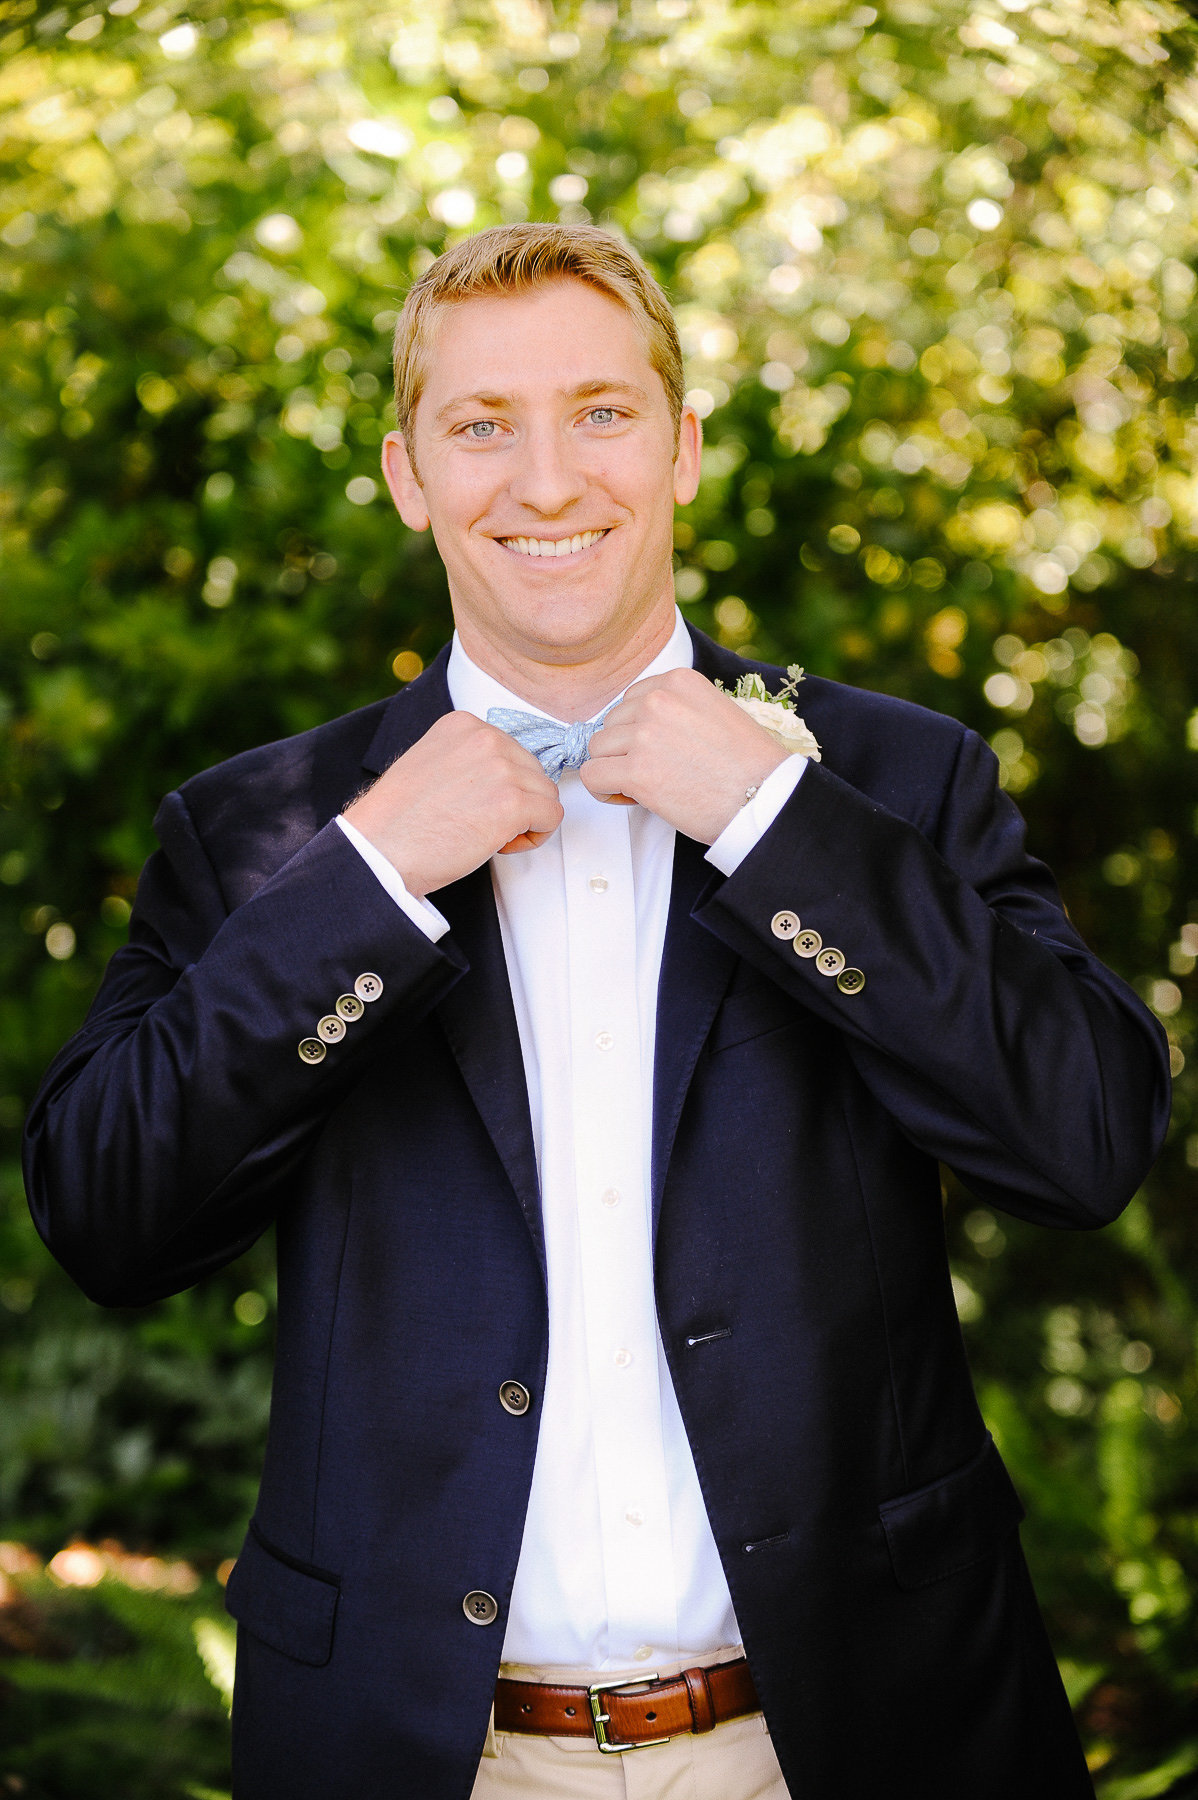 A groom tying his bowtie.